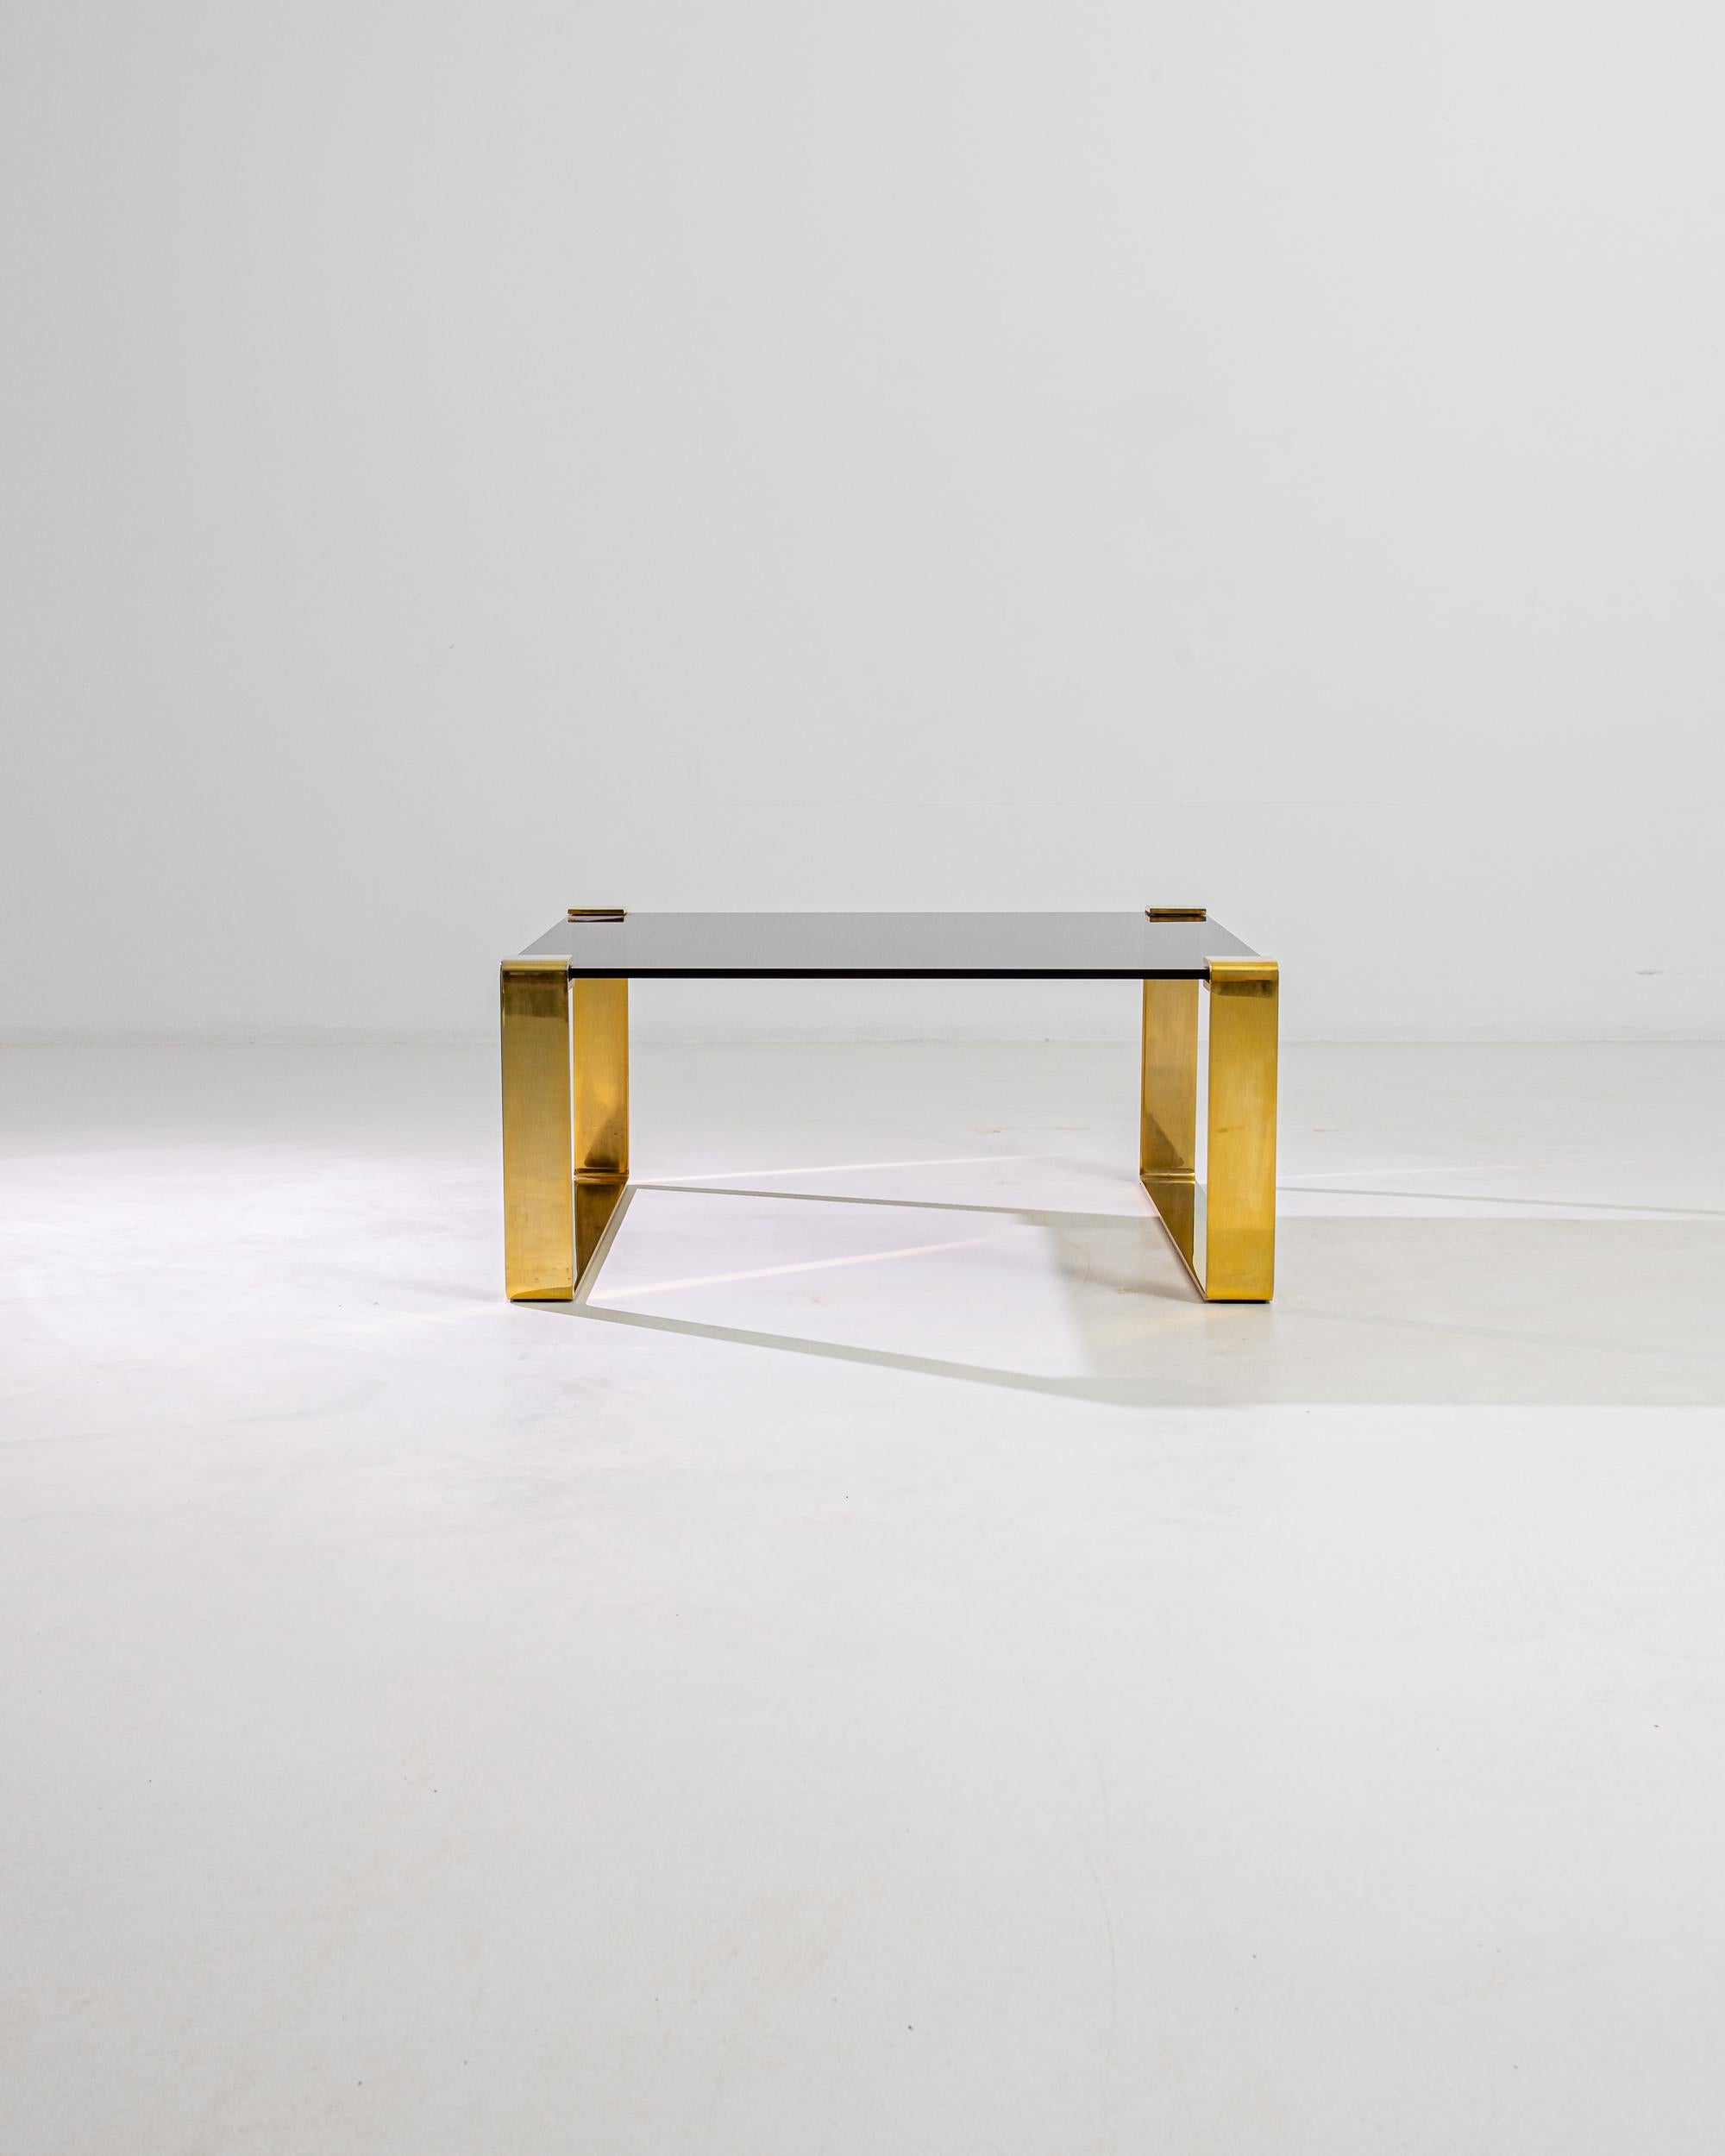 Simple yet glamorous, this vintage coffee table pairs a stripped-back design with luxurious materials for an impression of minimalist opulence. Made in Denmark in the 20th century, a tabletop of semi-opaque glass is clasped within the brackets of